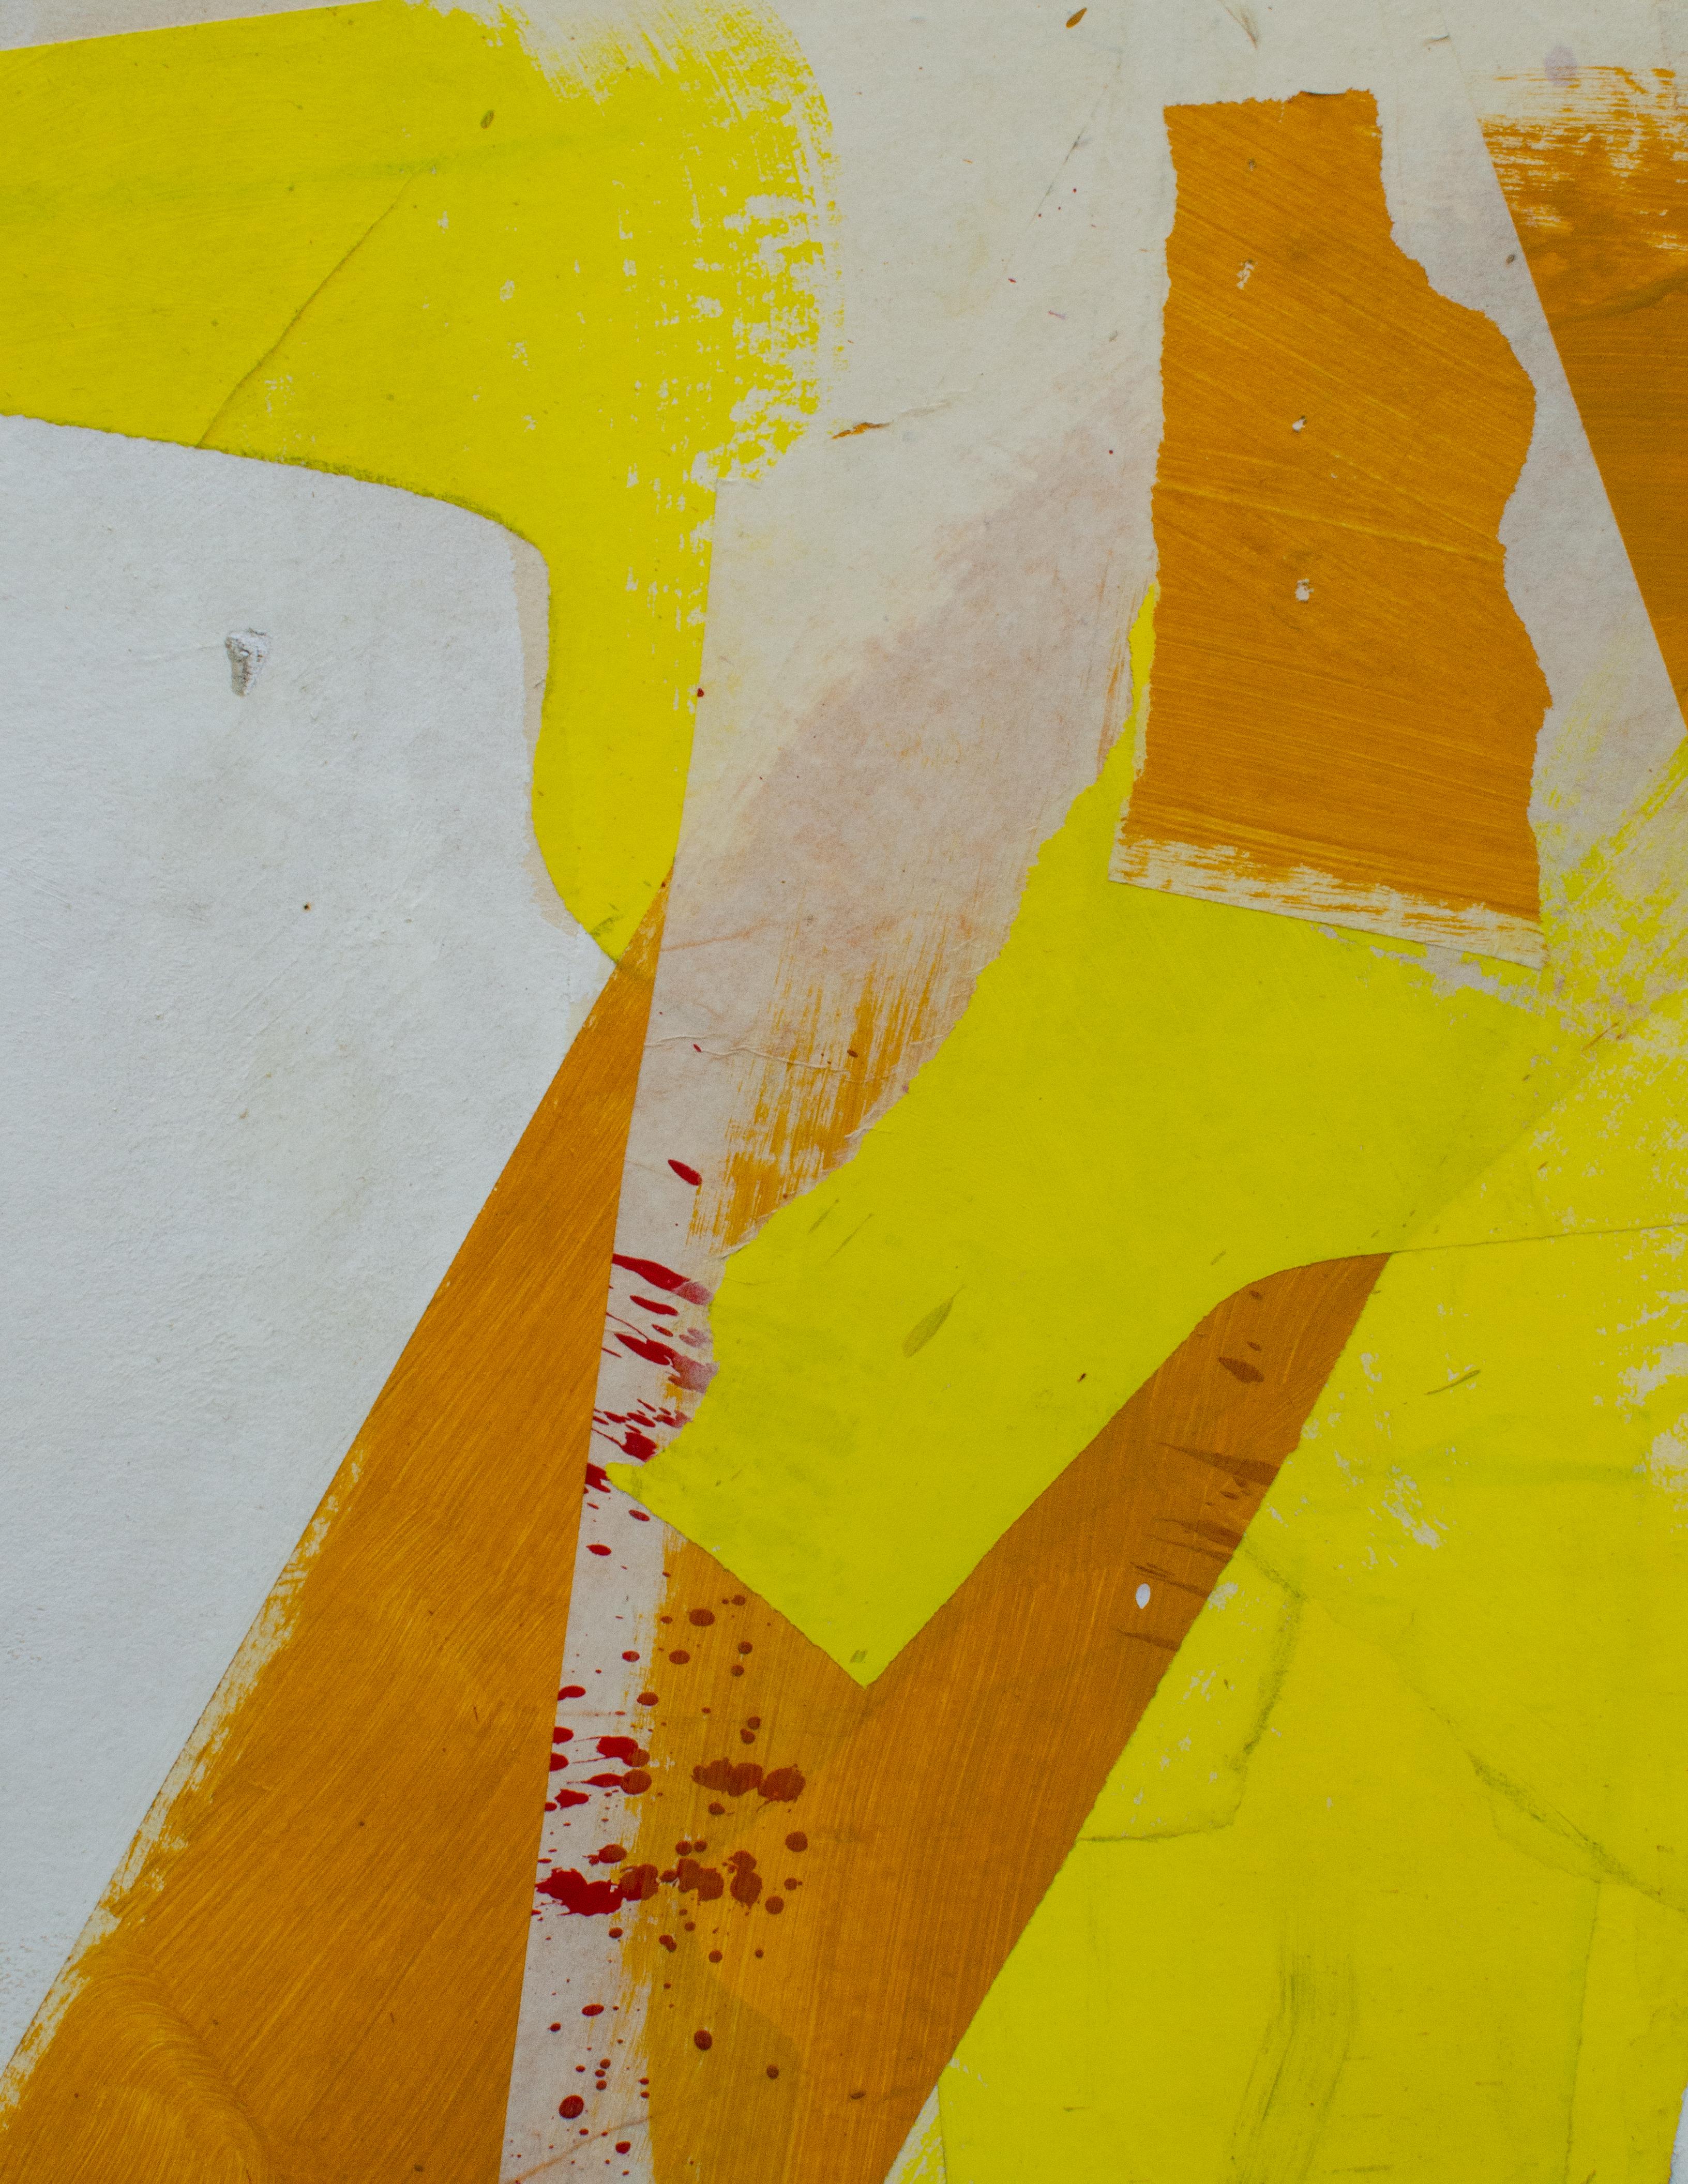 David Hare Abstract Painting - "Cronus Dining" Mixed Media On Paper Yellow and White Composition on Paper